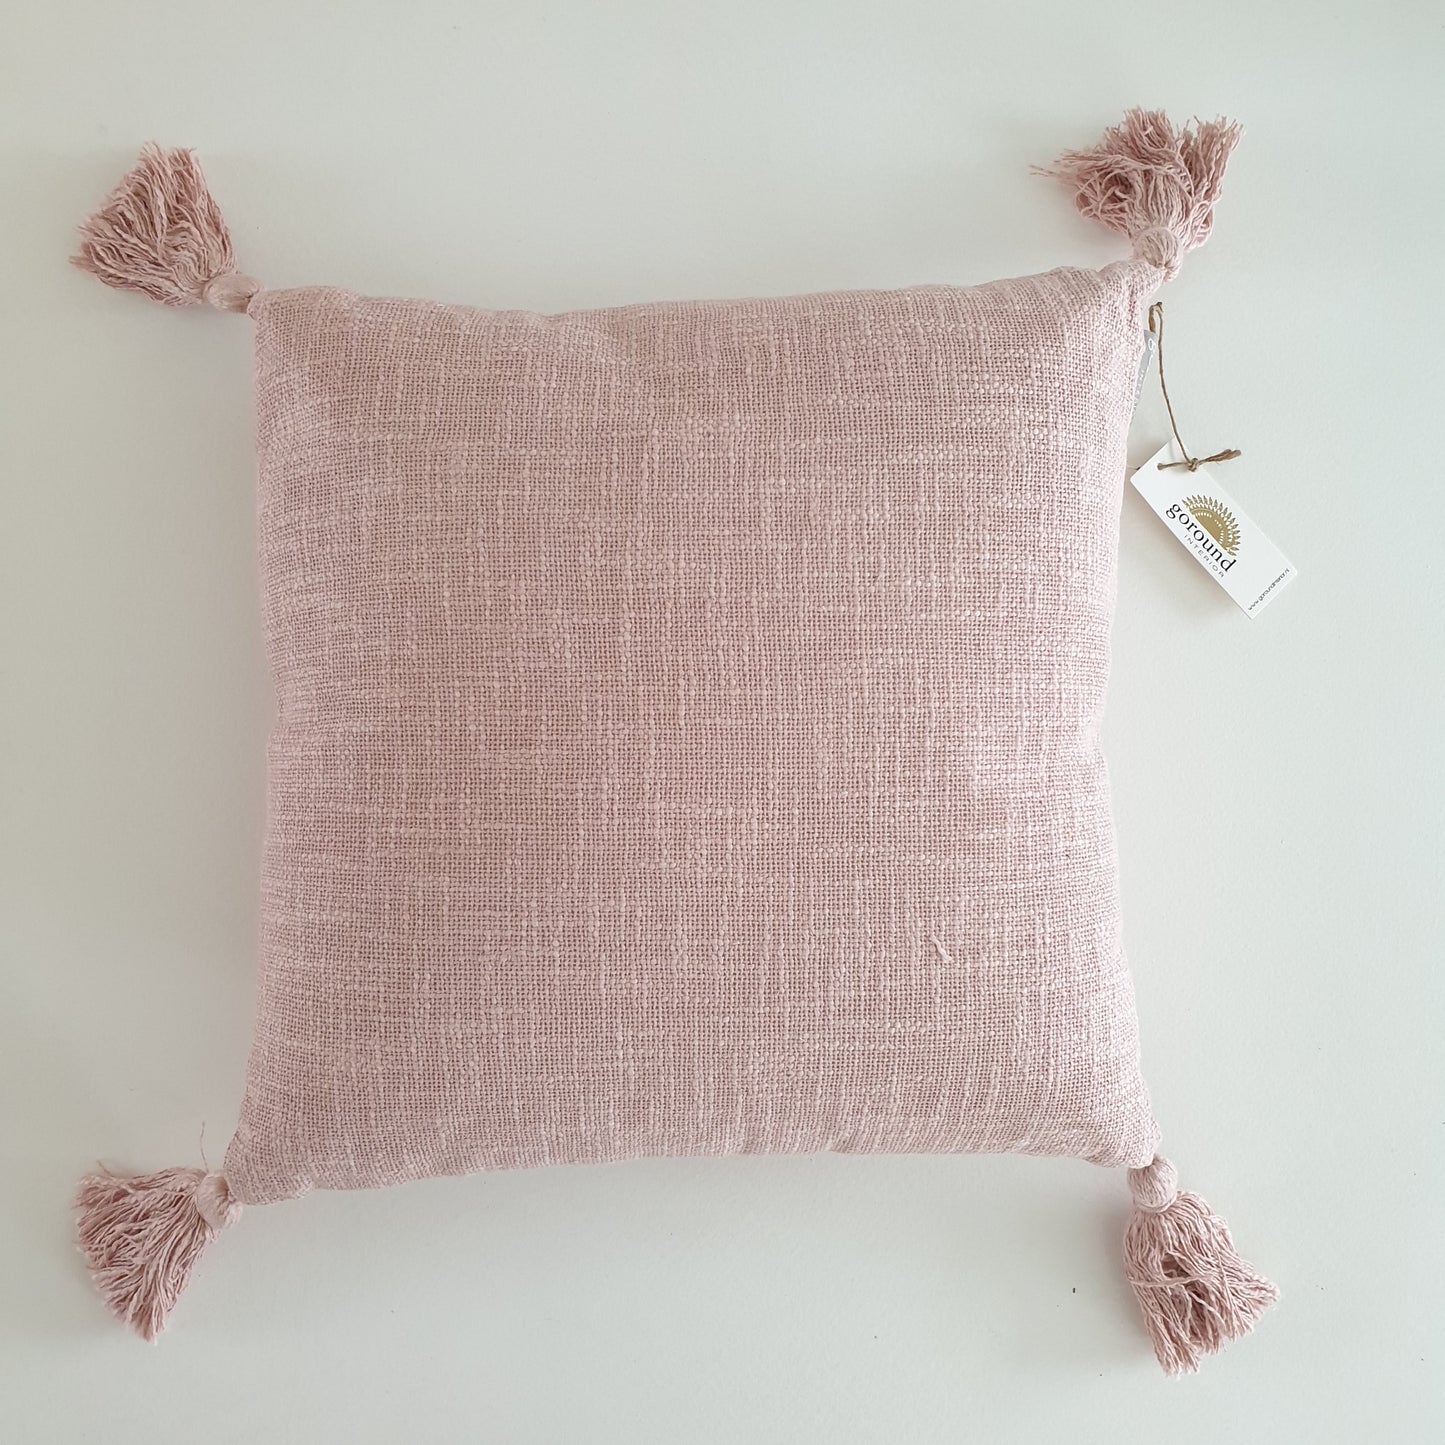 Pink pillow with tassels